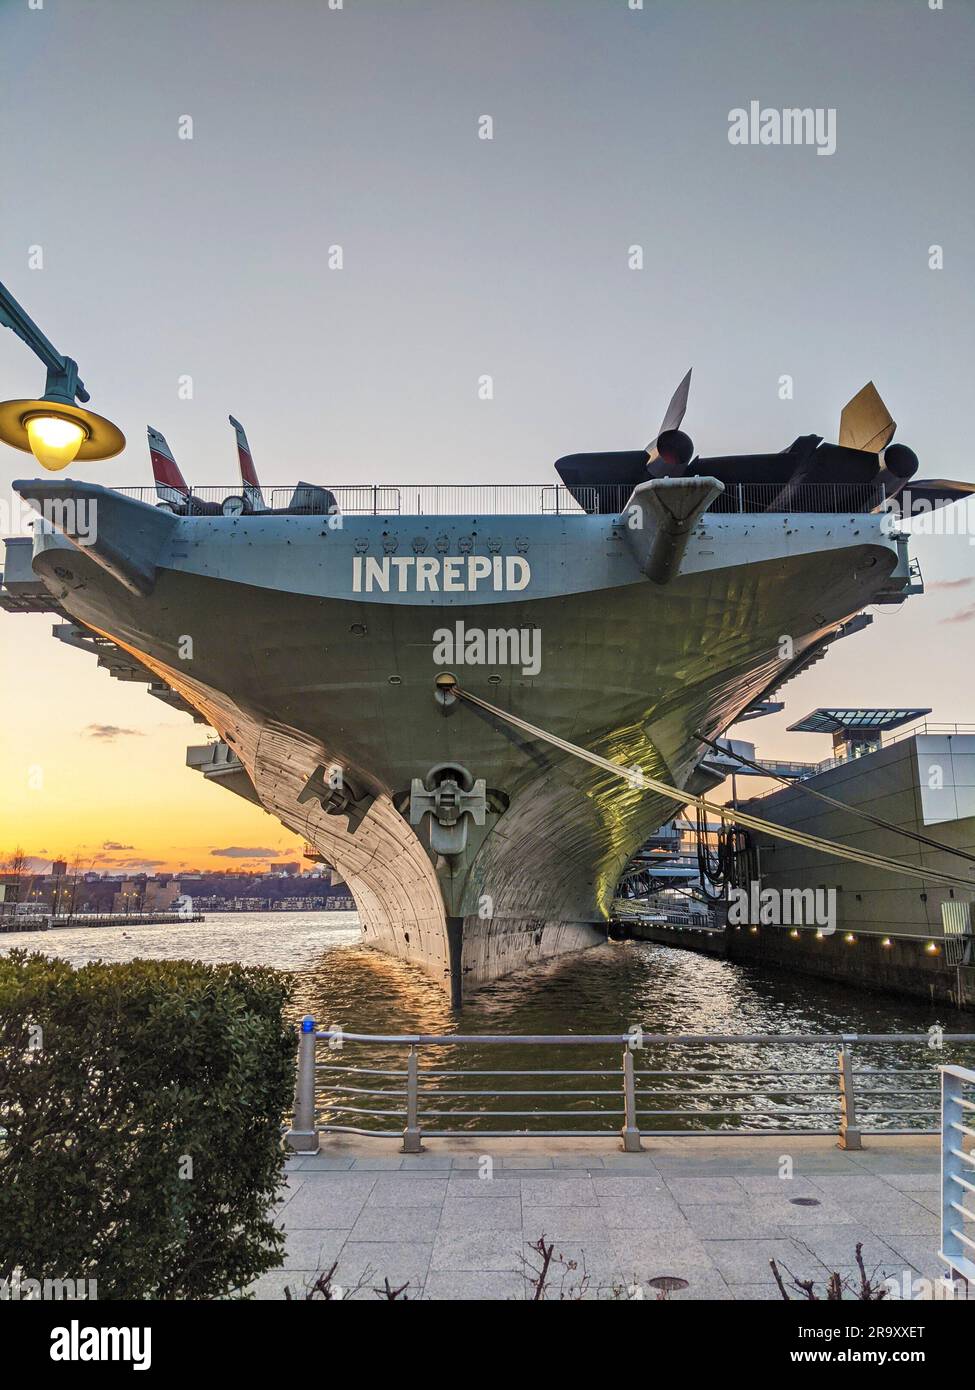 New York, USA - January 21, 2023: Exterior view of the USS Intrepid Sea, Air & Space Museum, a historic aircraft carrier located in NYC Stock Photo